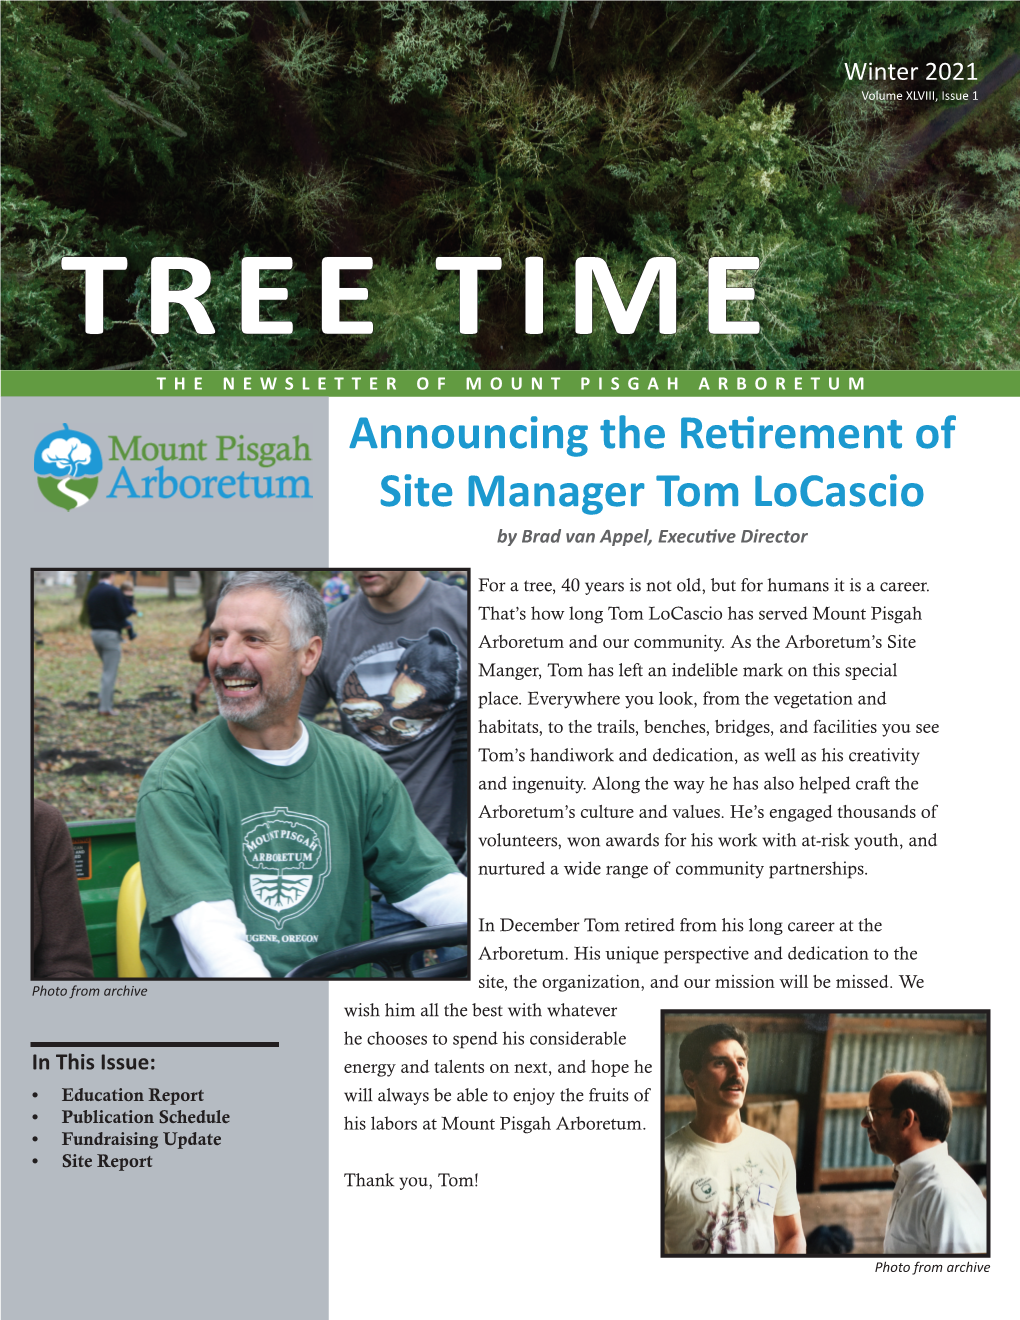 Announcing the Retirement of Site Manager Tom Locascio by Brad Van Appel, Executive Director